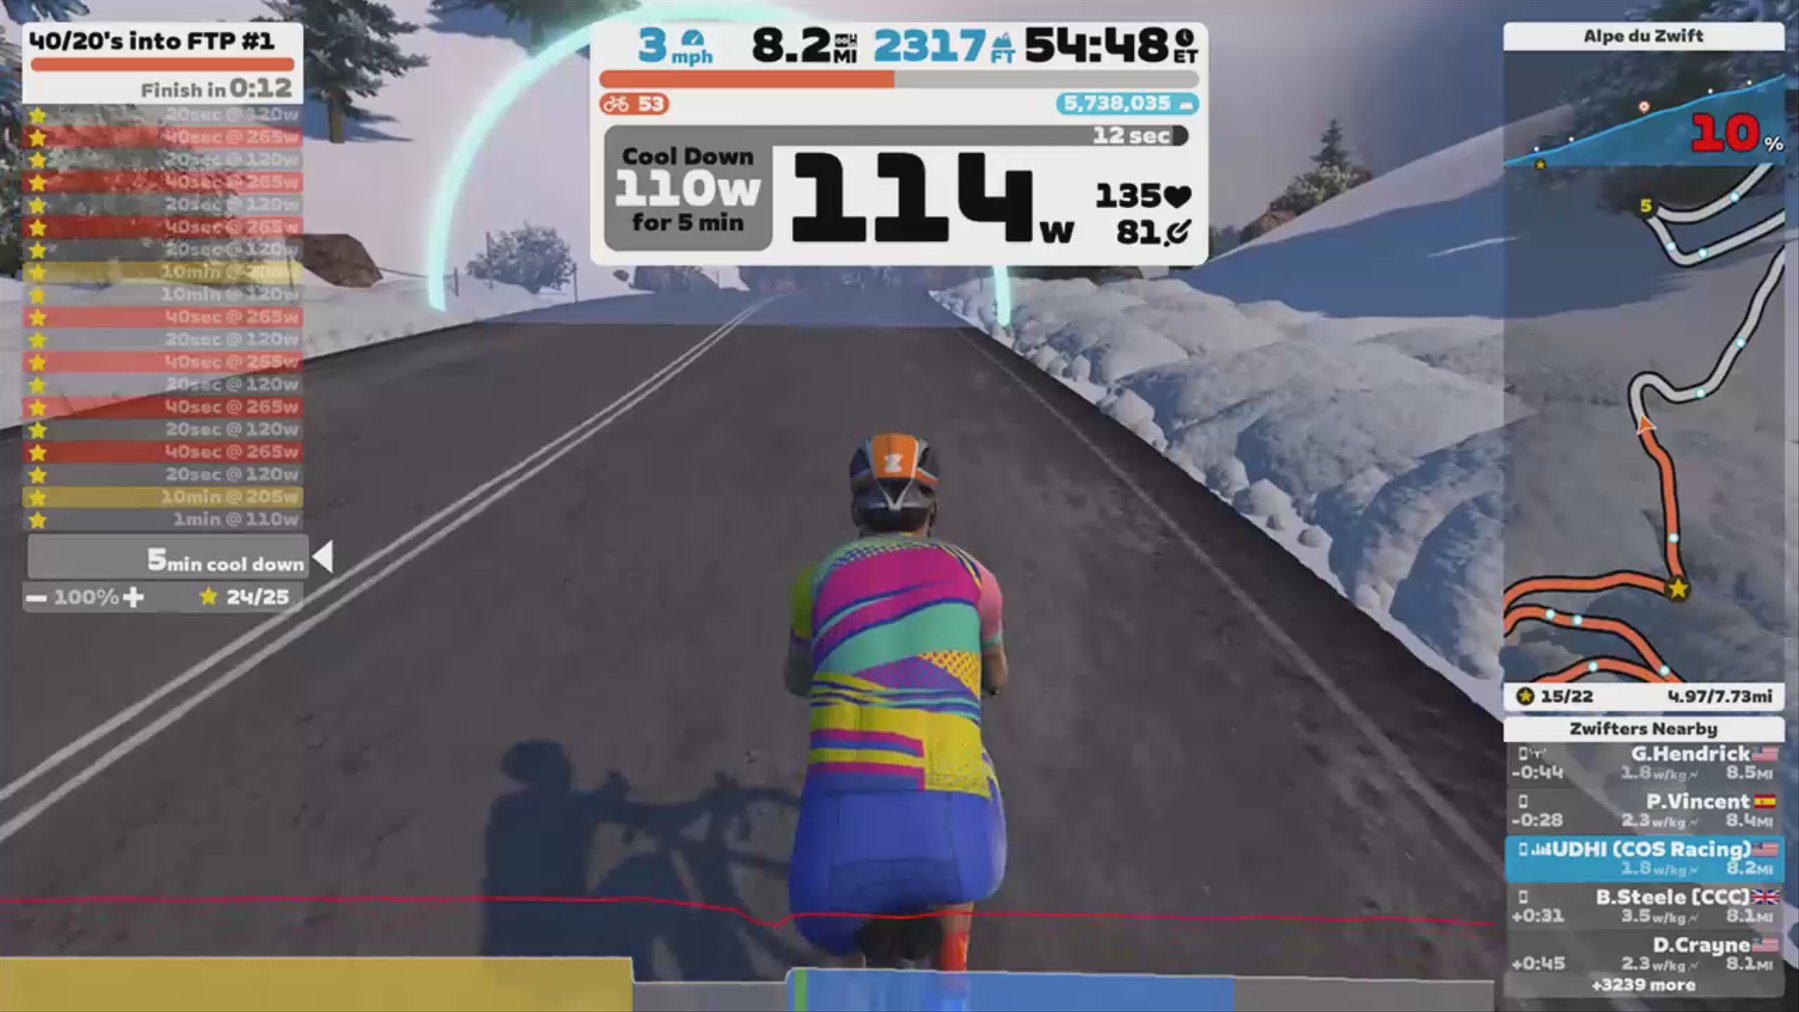 Zwift - 40/20's into FTP #1 on Road to Sky in Watopia